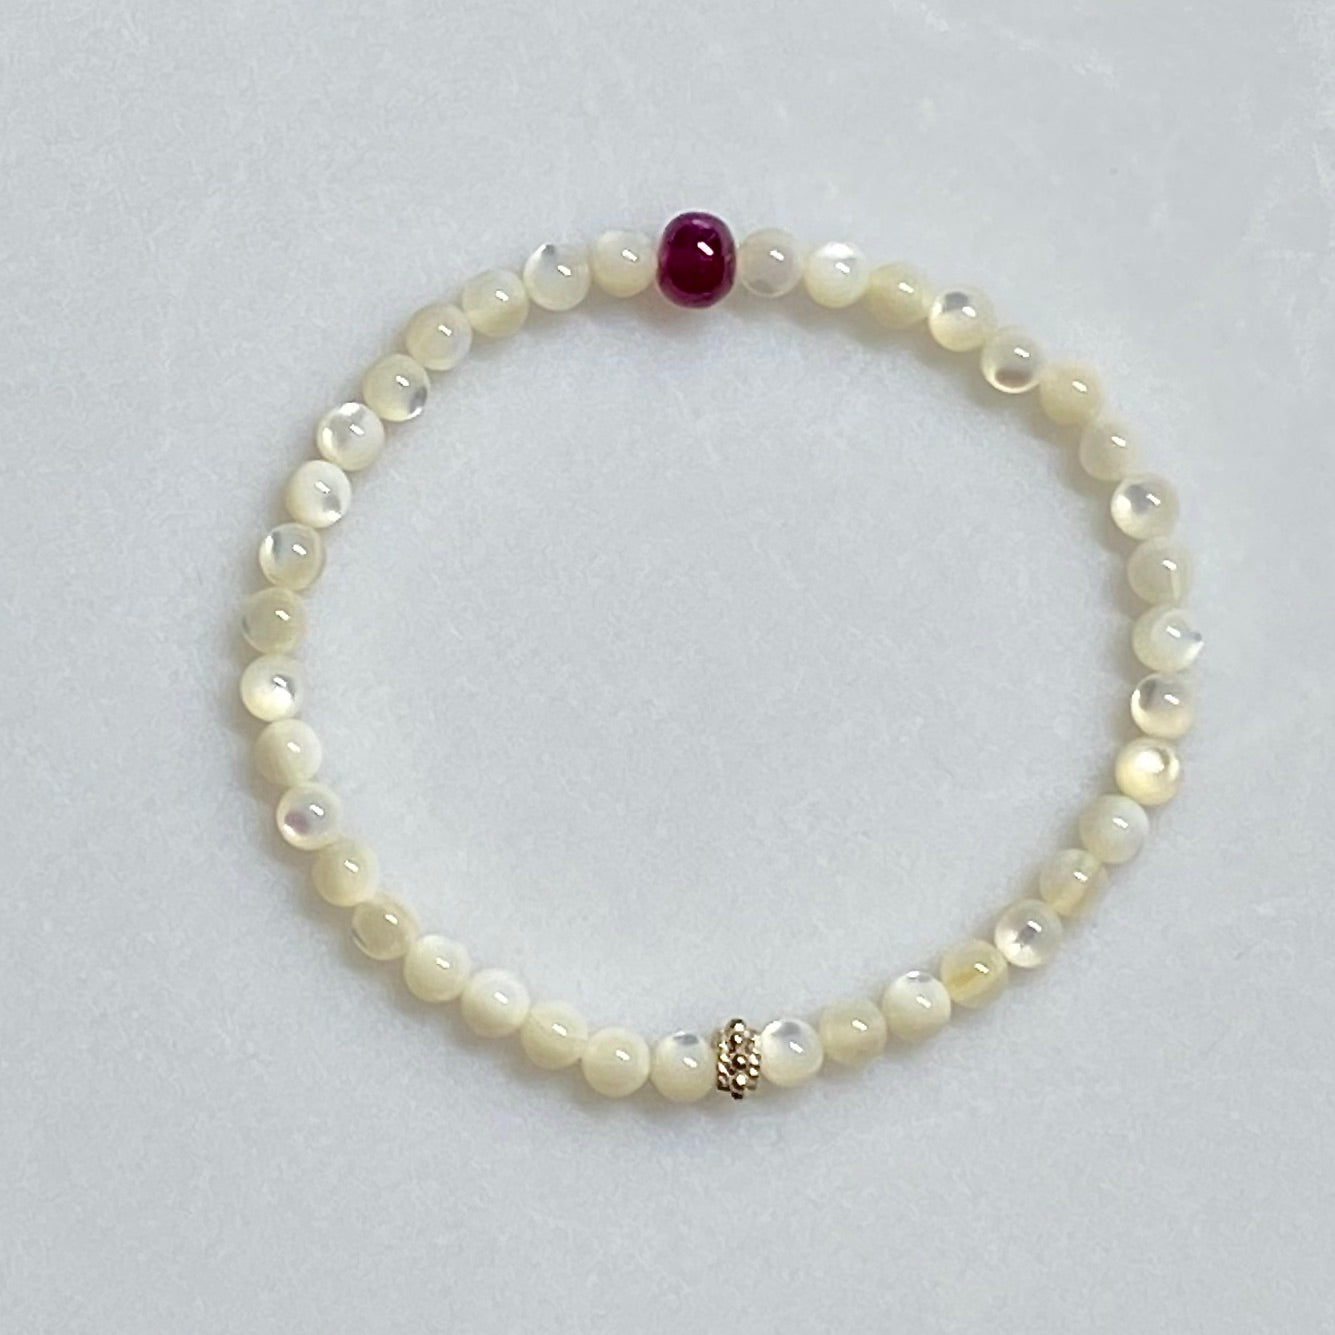 Arpaia 6.5" gemstone stretch bracelet with natural ruby & white mother of pearl